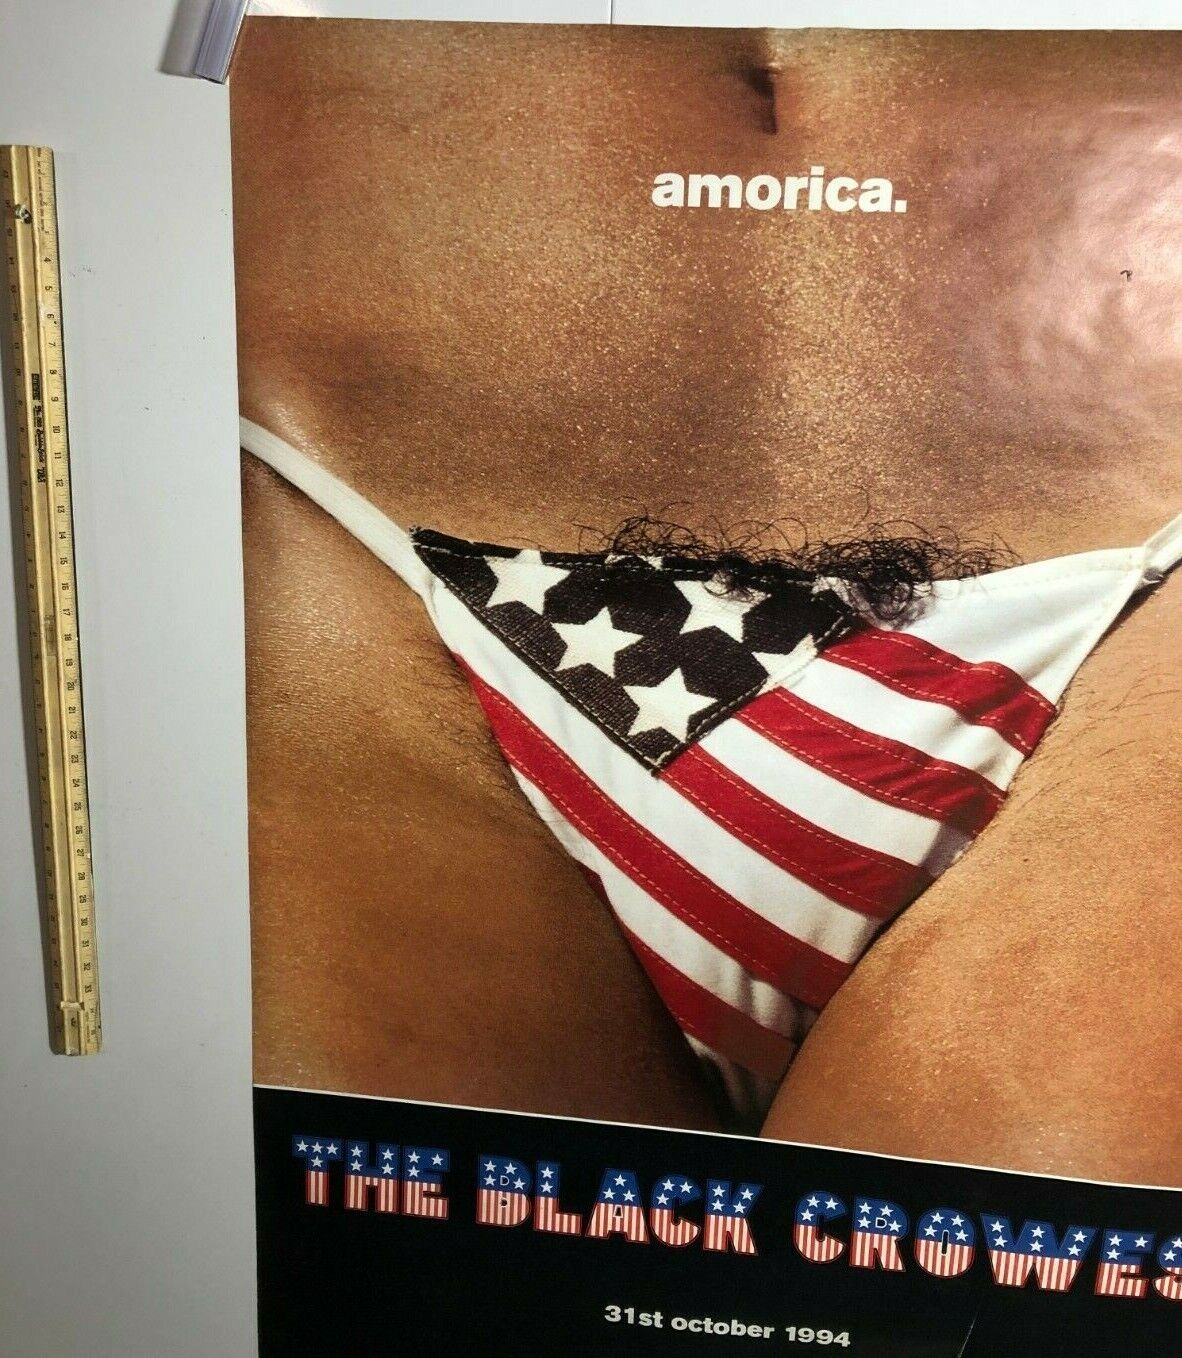 Huge Subway Poster The Black Crowes Amorica 1994 October Def American